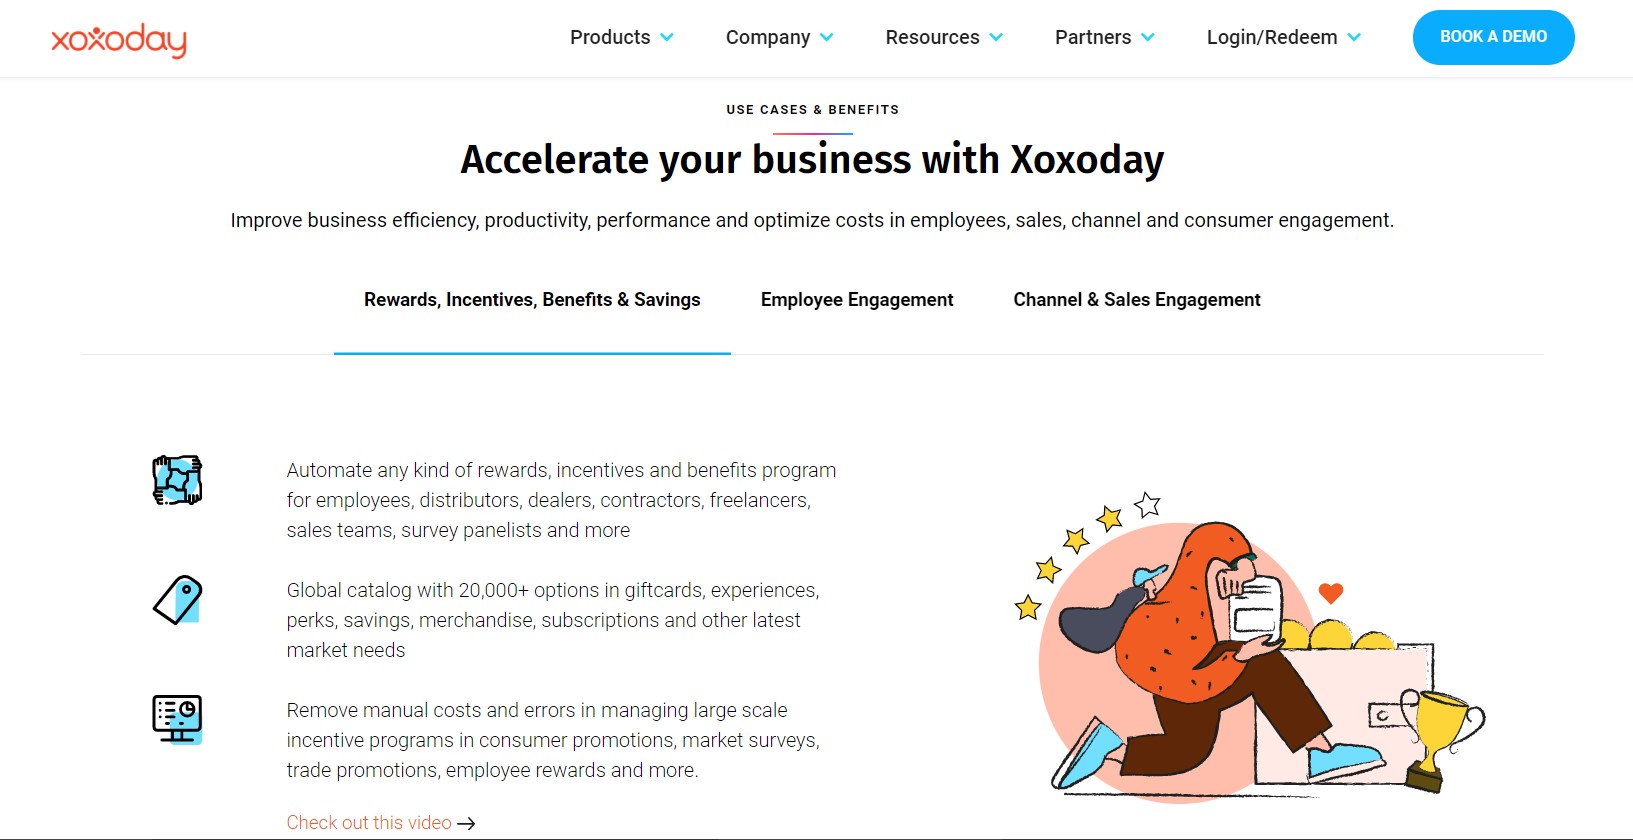 Find pricing, reviews and other details about Xoxoday